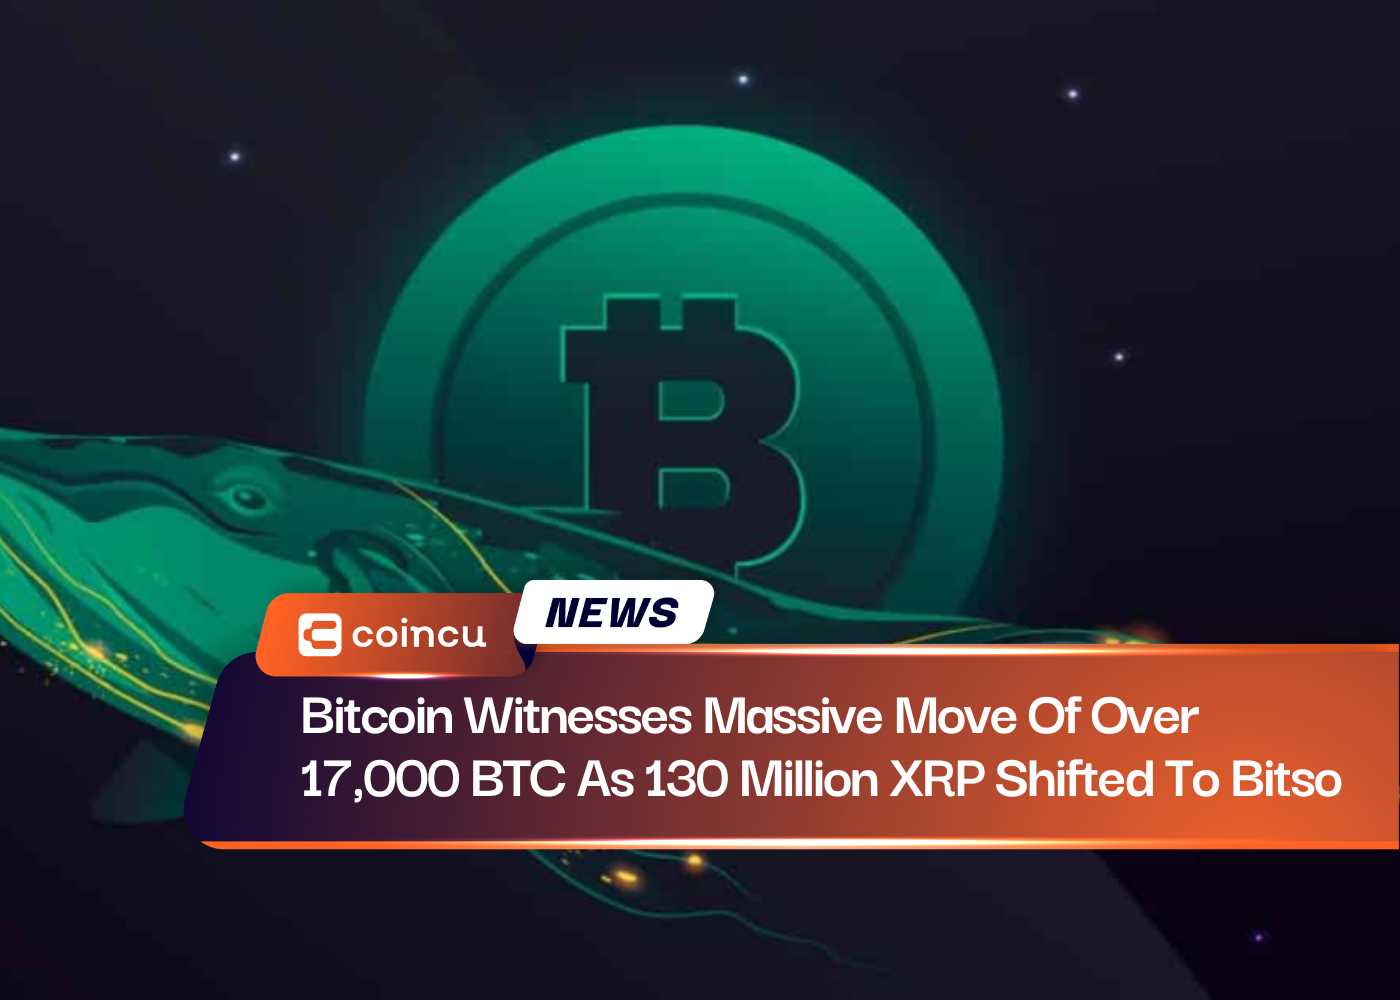 Bitcoin Witnesses Massive Move Of Over 17,000 BTC As 130 Million XRP Shifted To Bitso